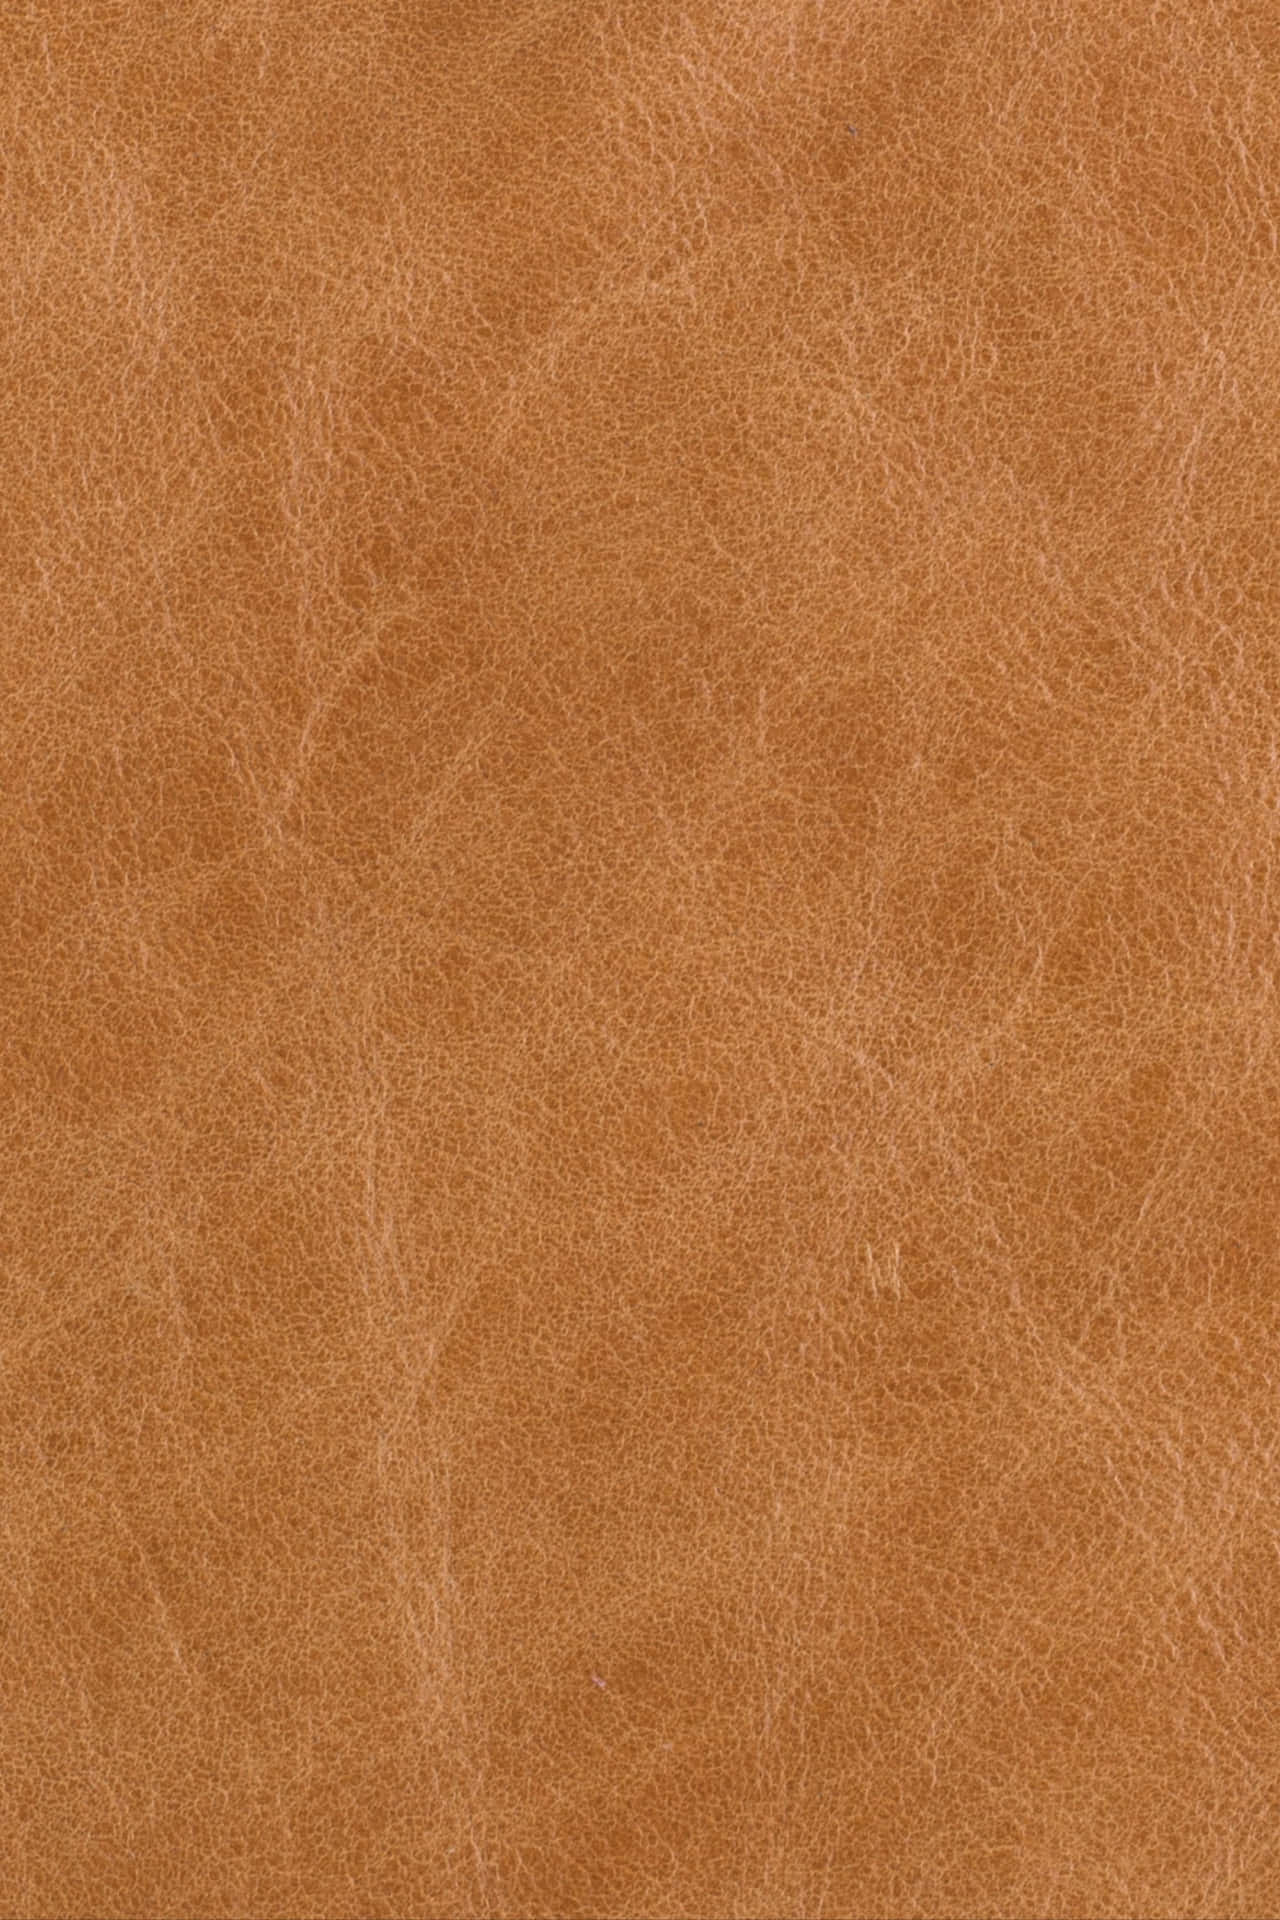 Sophisticated detailed leather texture image